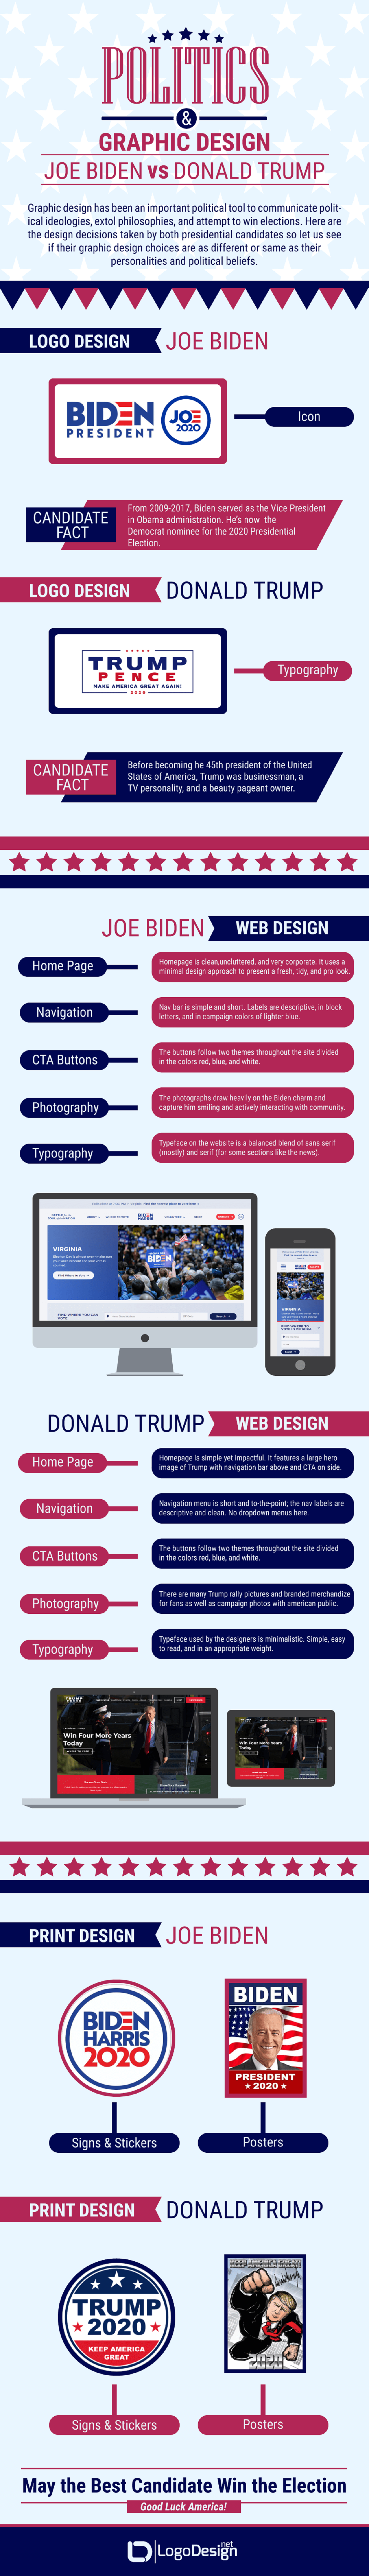 Politics & Graphic Design: What Do Biden and Trump Campaigns Tell Us #infographic 